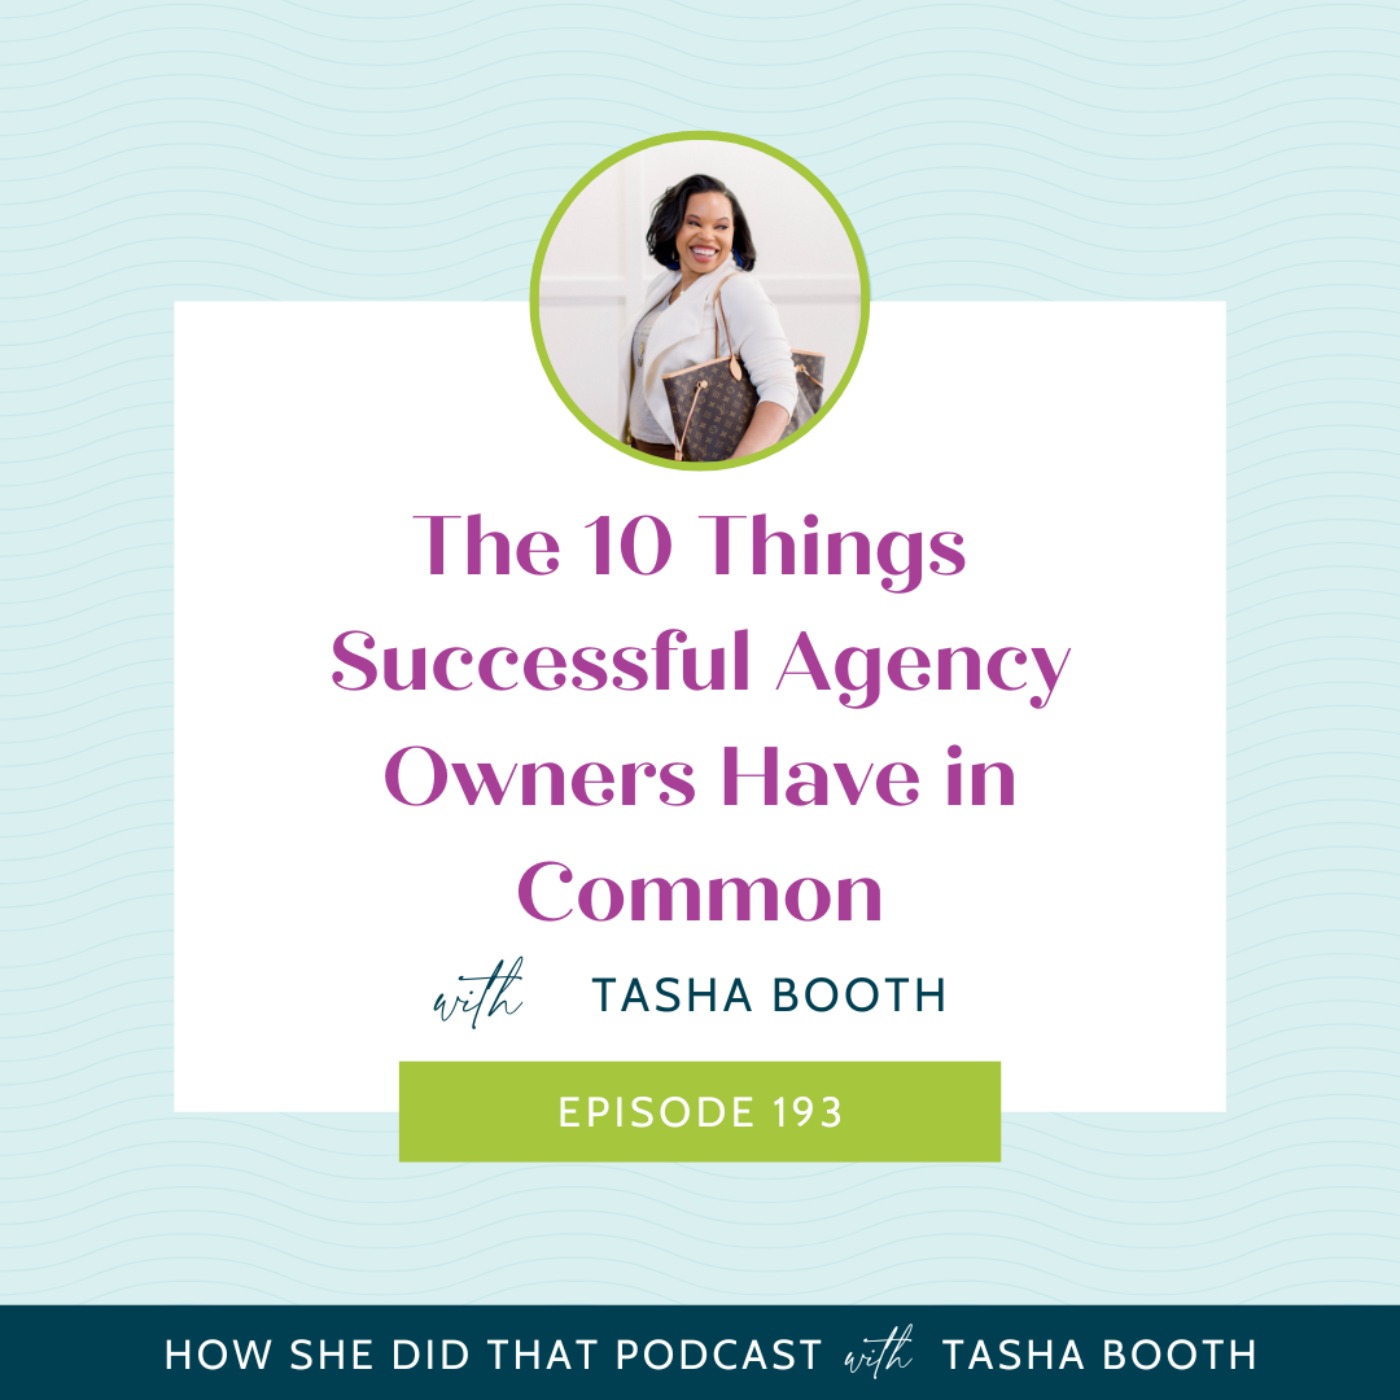 The 10 Things Successful Agency Owners Have in Common